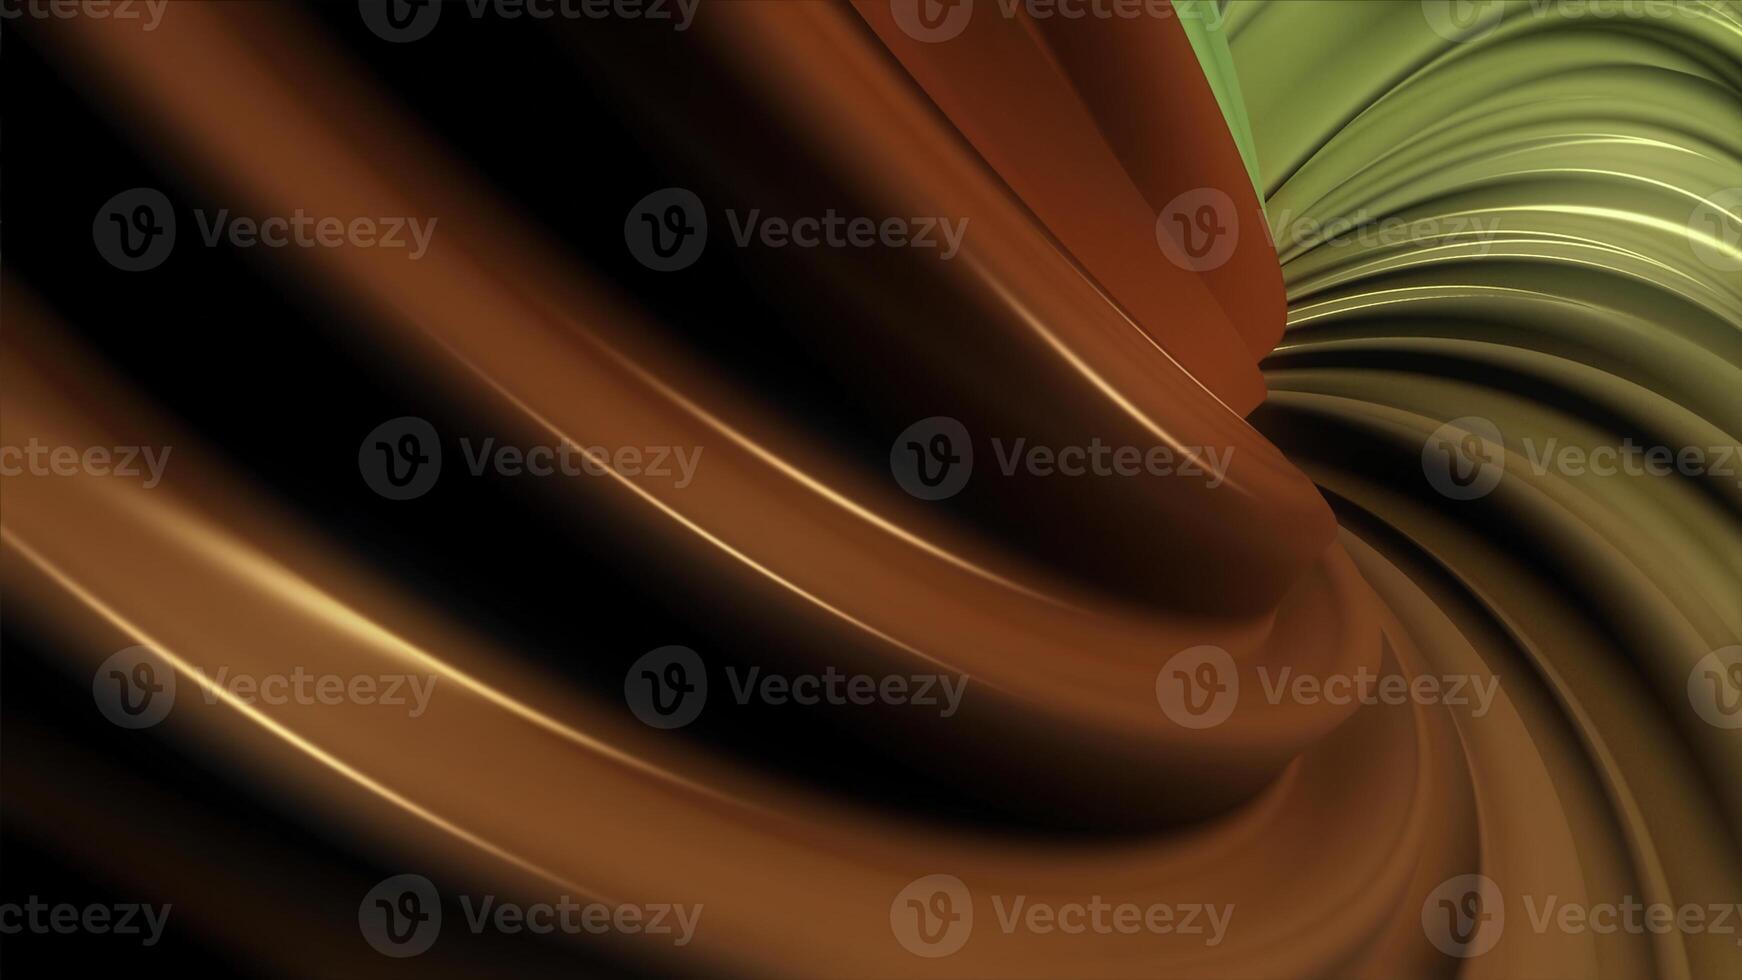 Colorful spiral that spins and gives a dreamy or hypnotic effect. Seamless loop. Animation of rotation hypnosis spiral from colorful caramel, glass or plastic photo